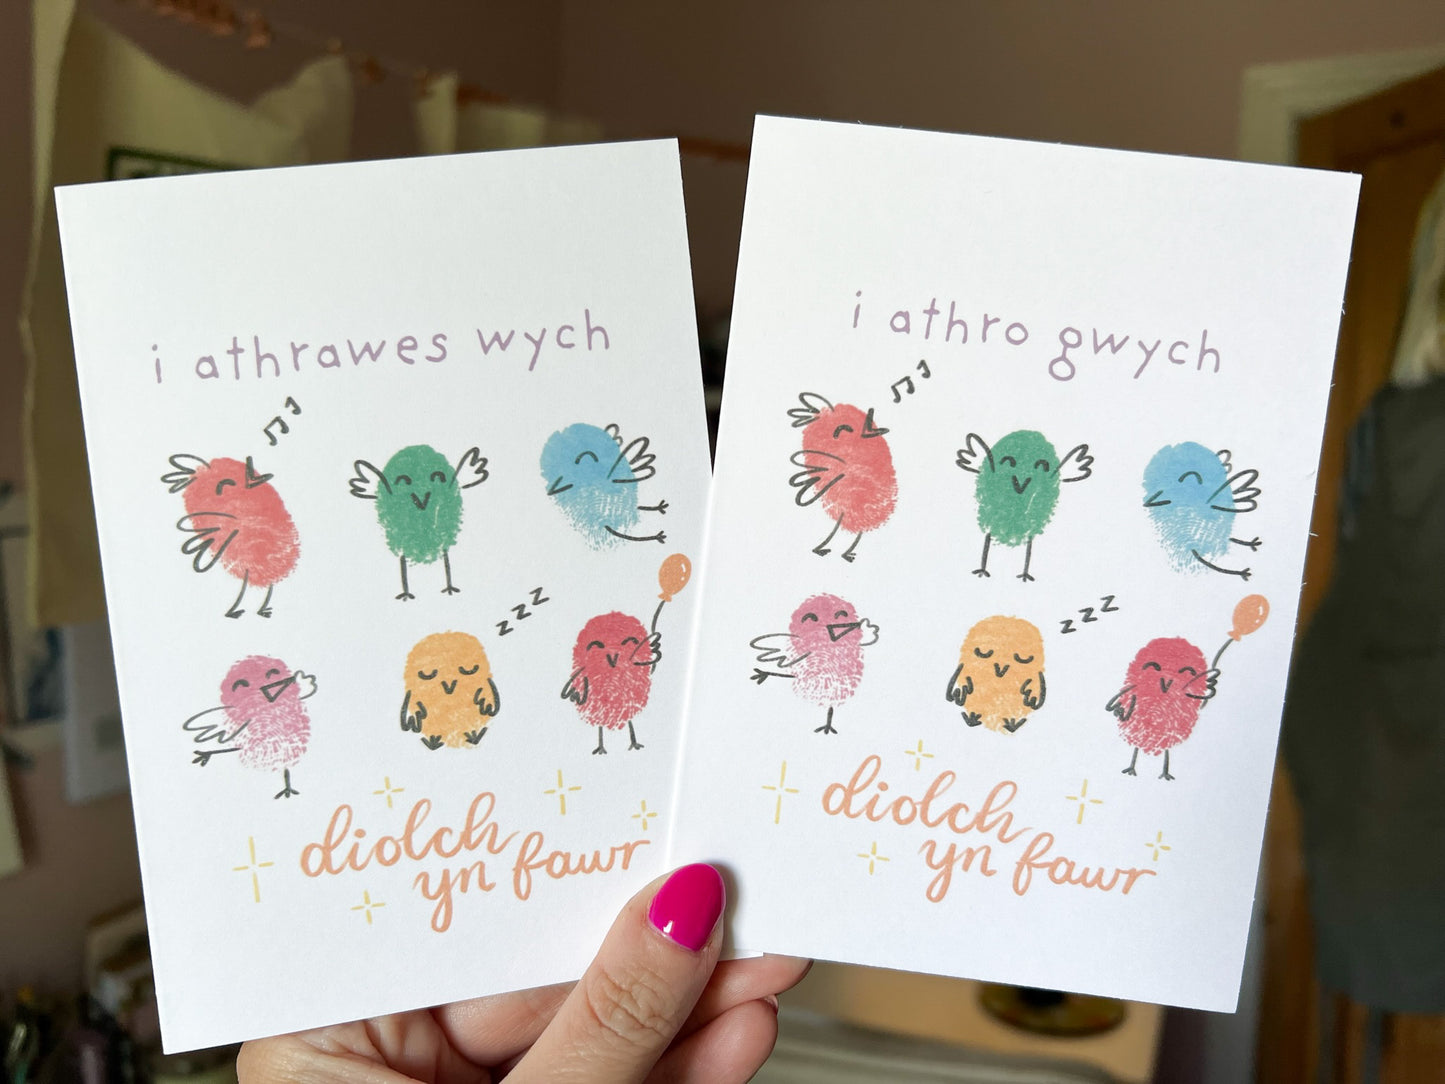 A hand holding two Welsh teacher thank you cards, one says 'i athrawes wych, diolch yn fawr' and the other 'i athro gwych, diolch yn fawr'. Both have six little fingerprinted birds on.